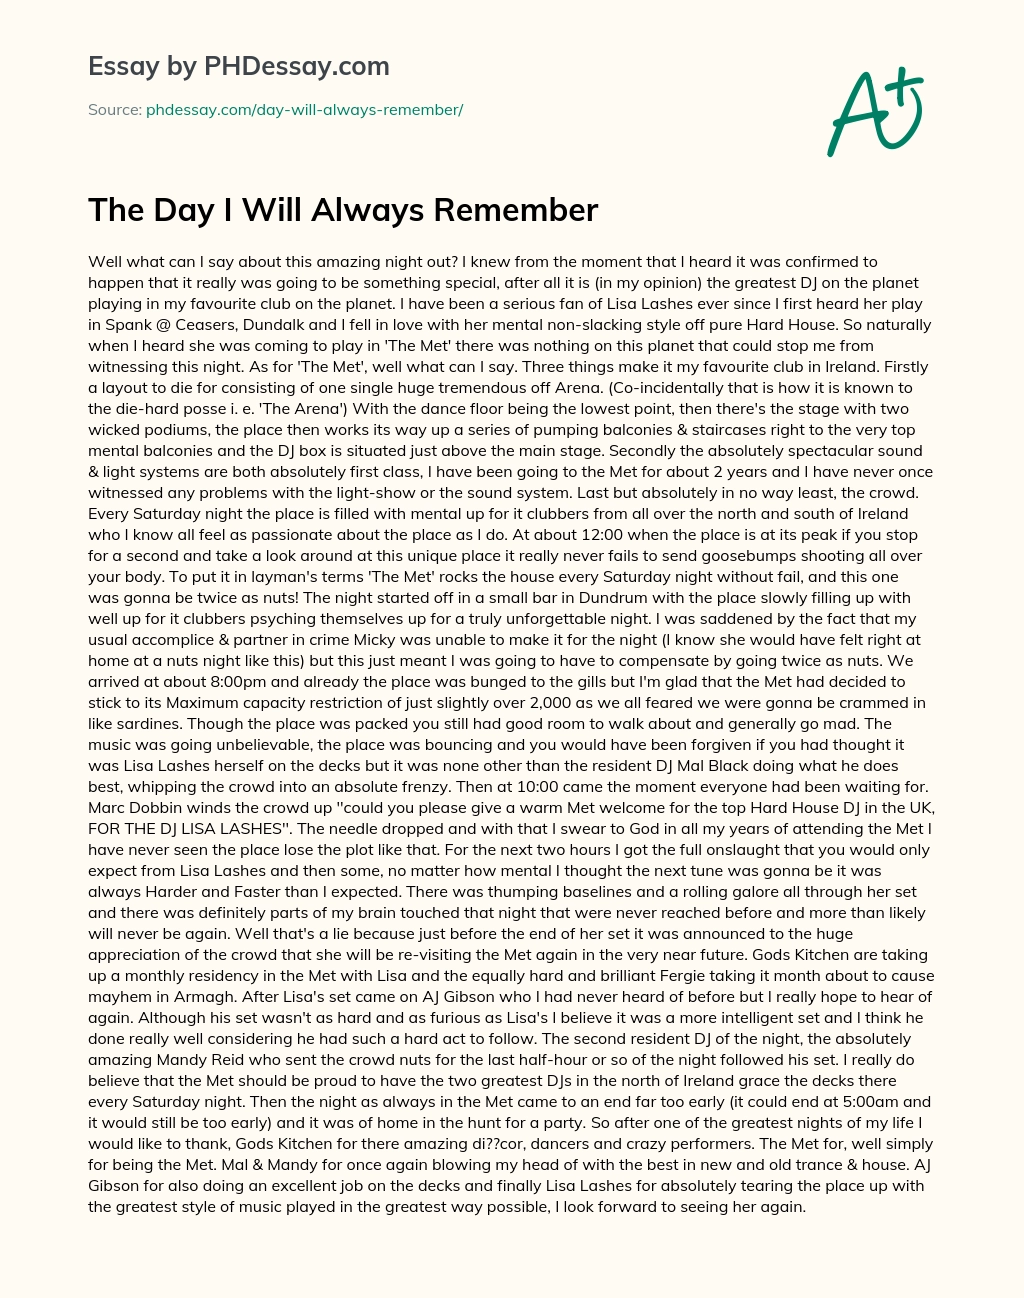 a day i will always remember short essay